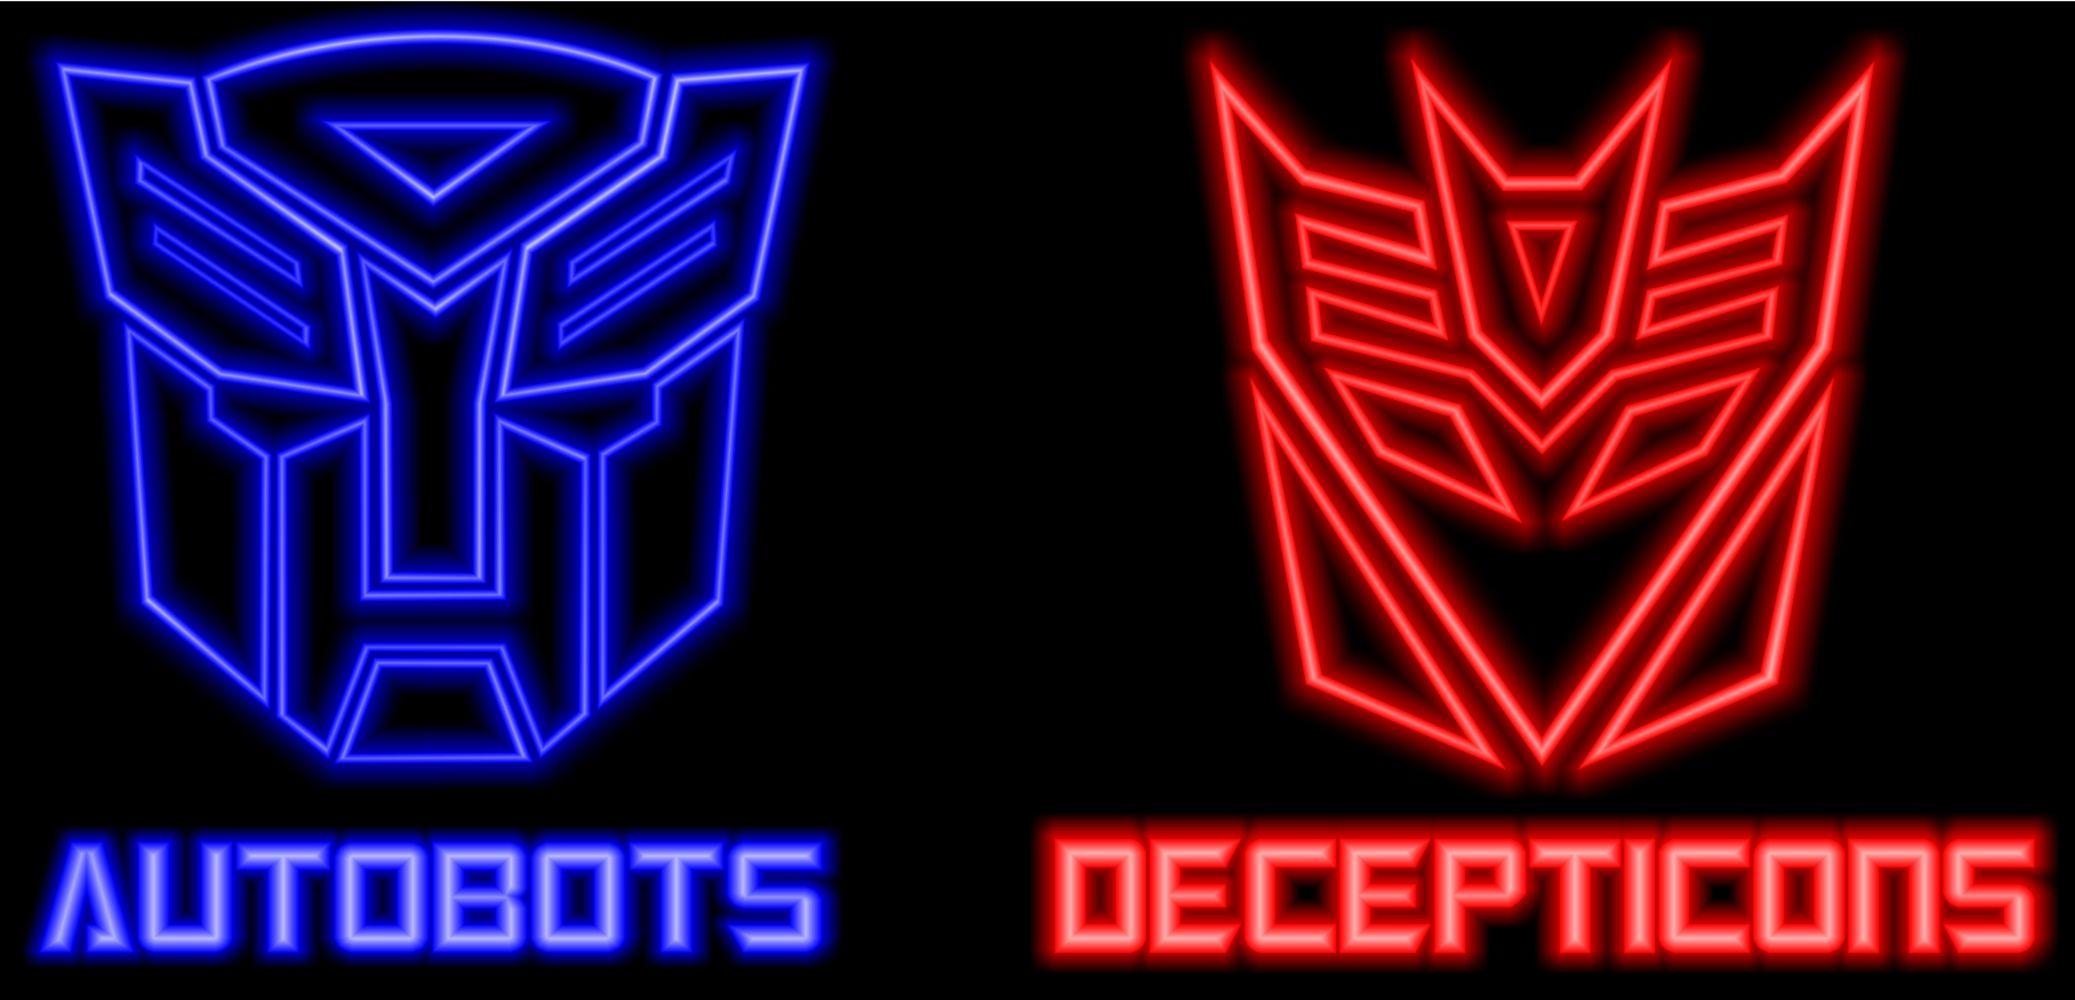 Red and Blue Autobot Logo - Autobots and decepticons Logos